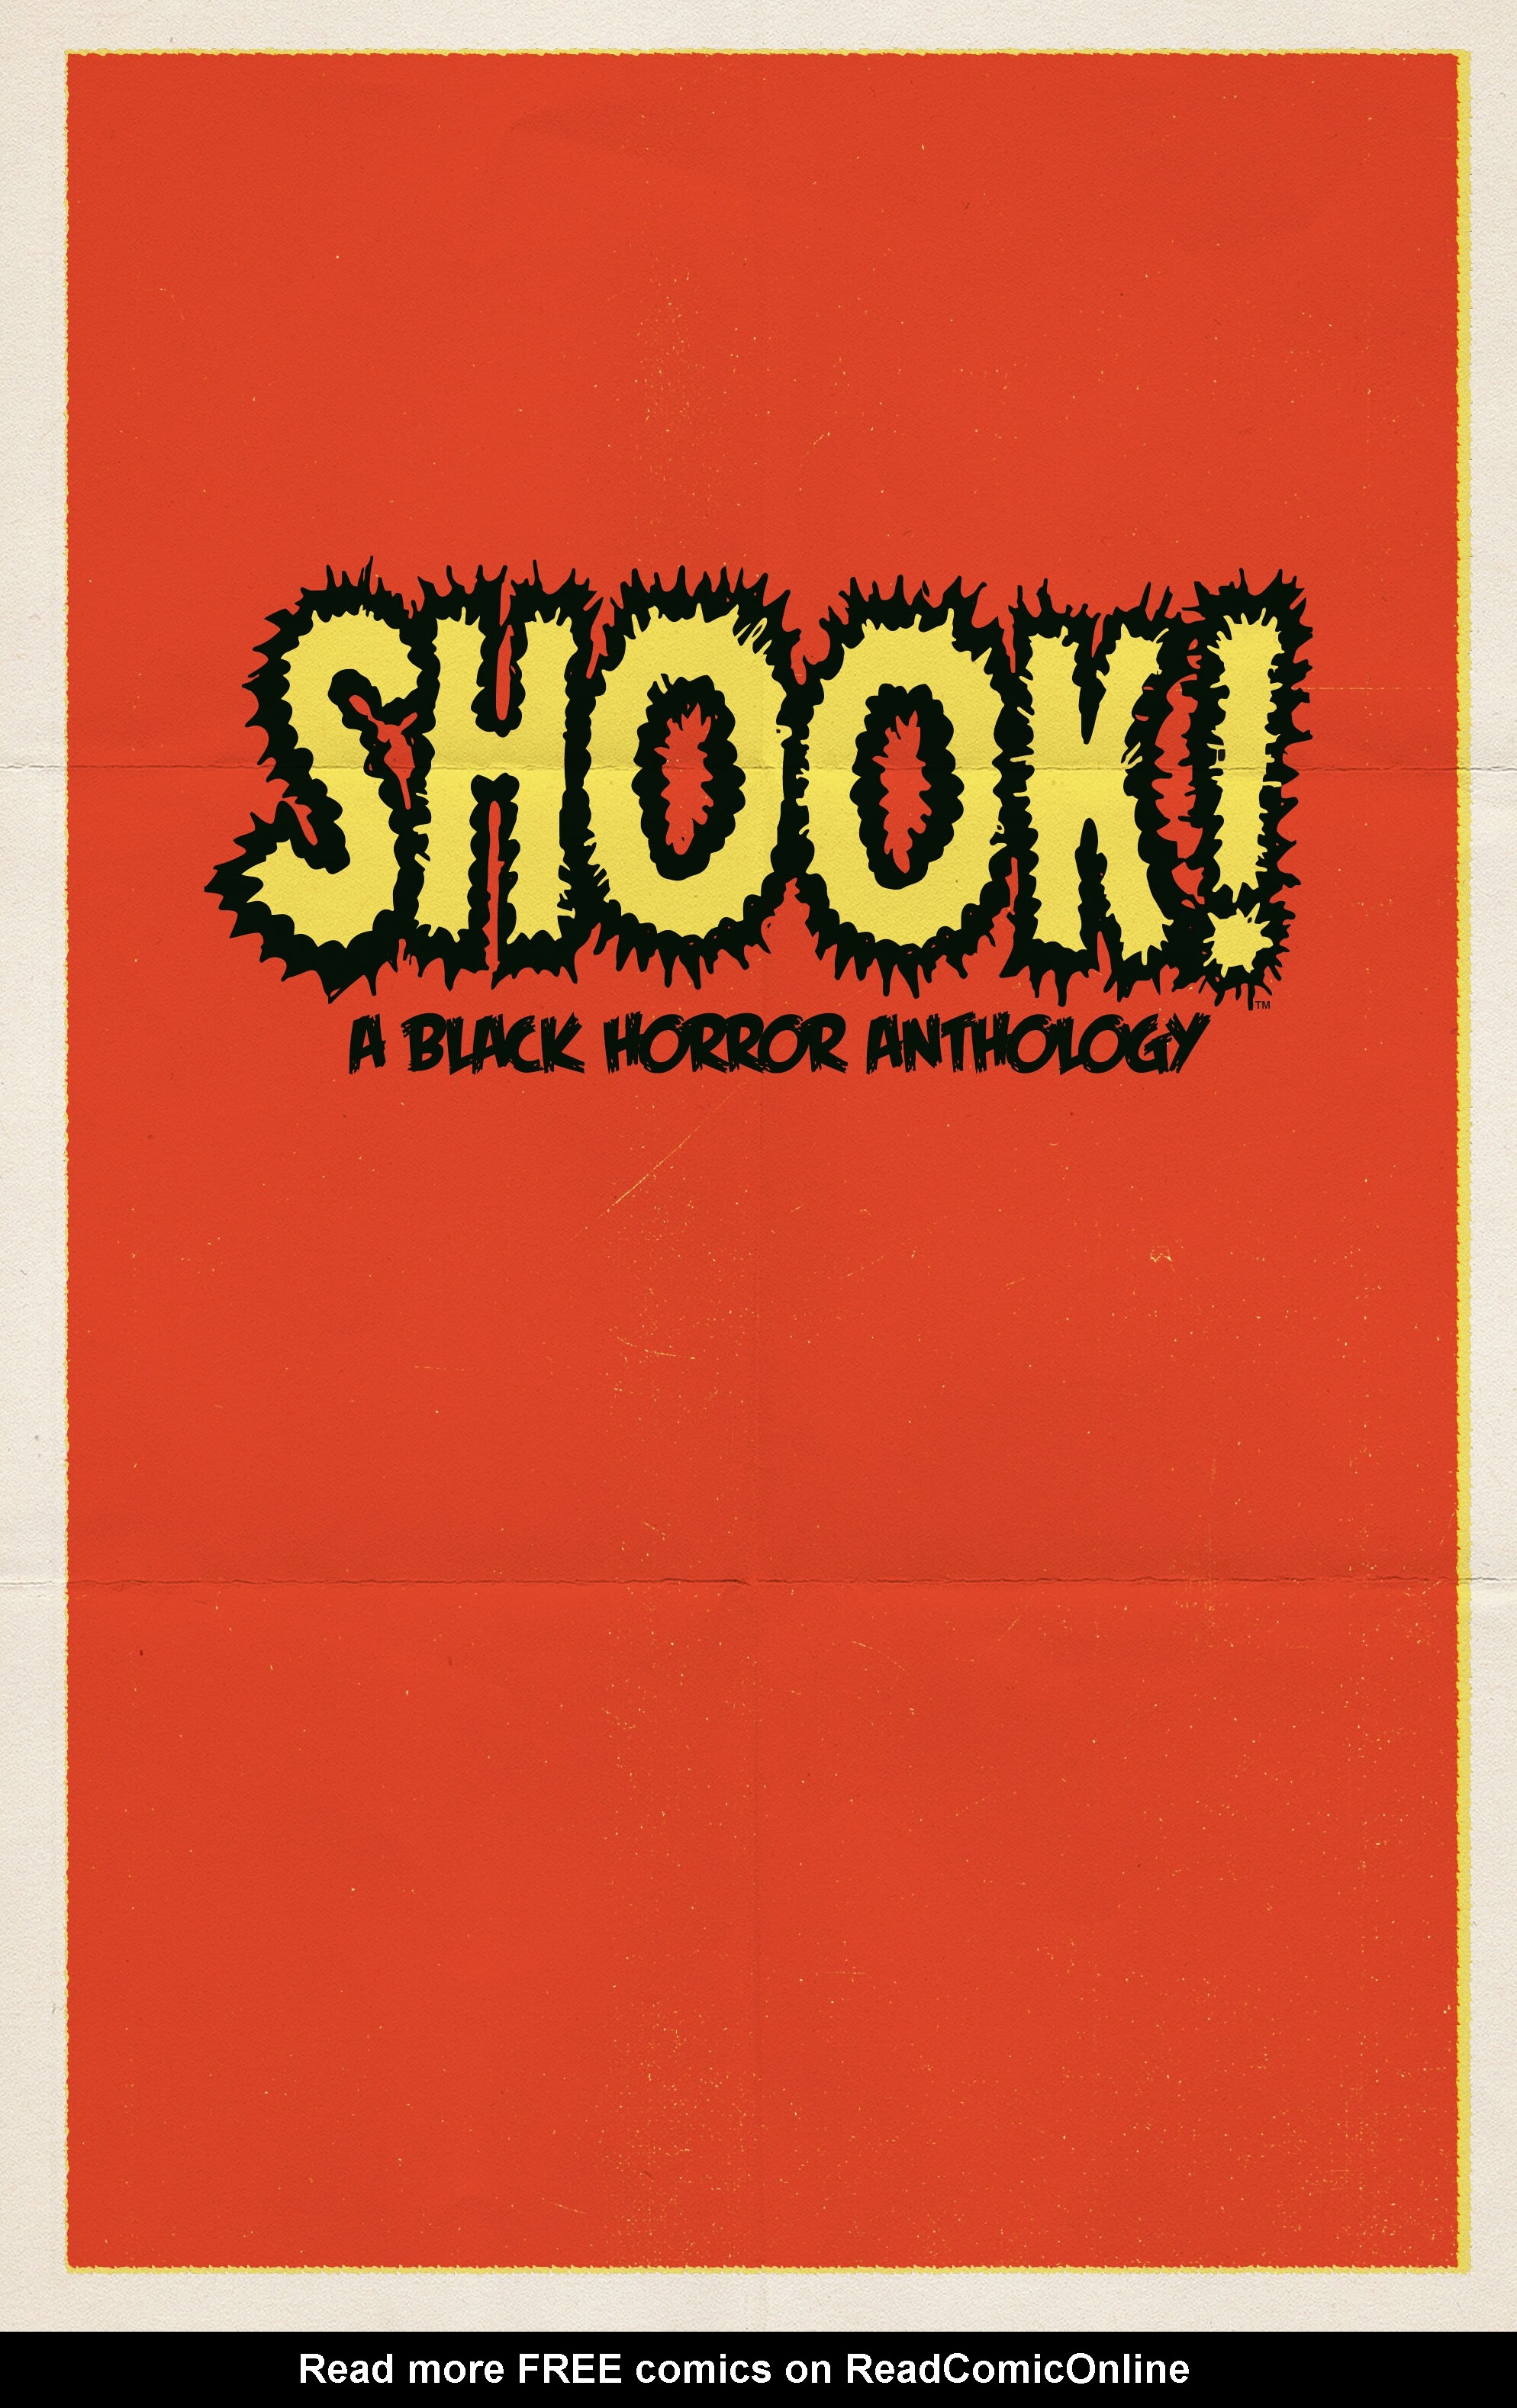 Read online Shook!: A Black Horror Anthology comic -  Issue # TPB (Part 1) - 2